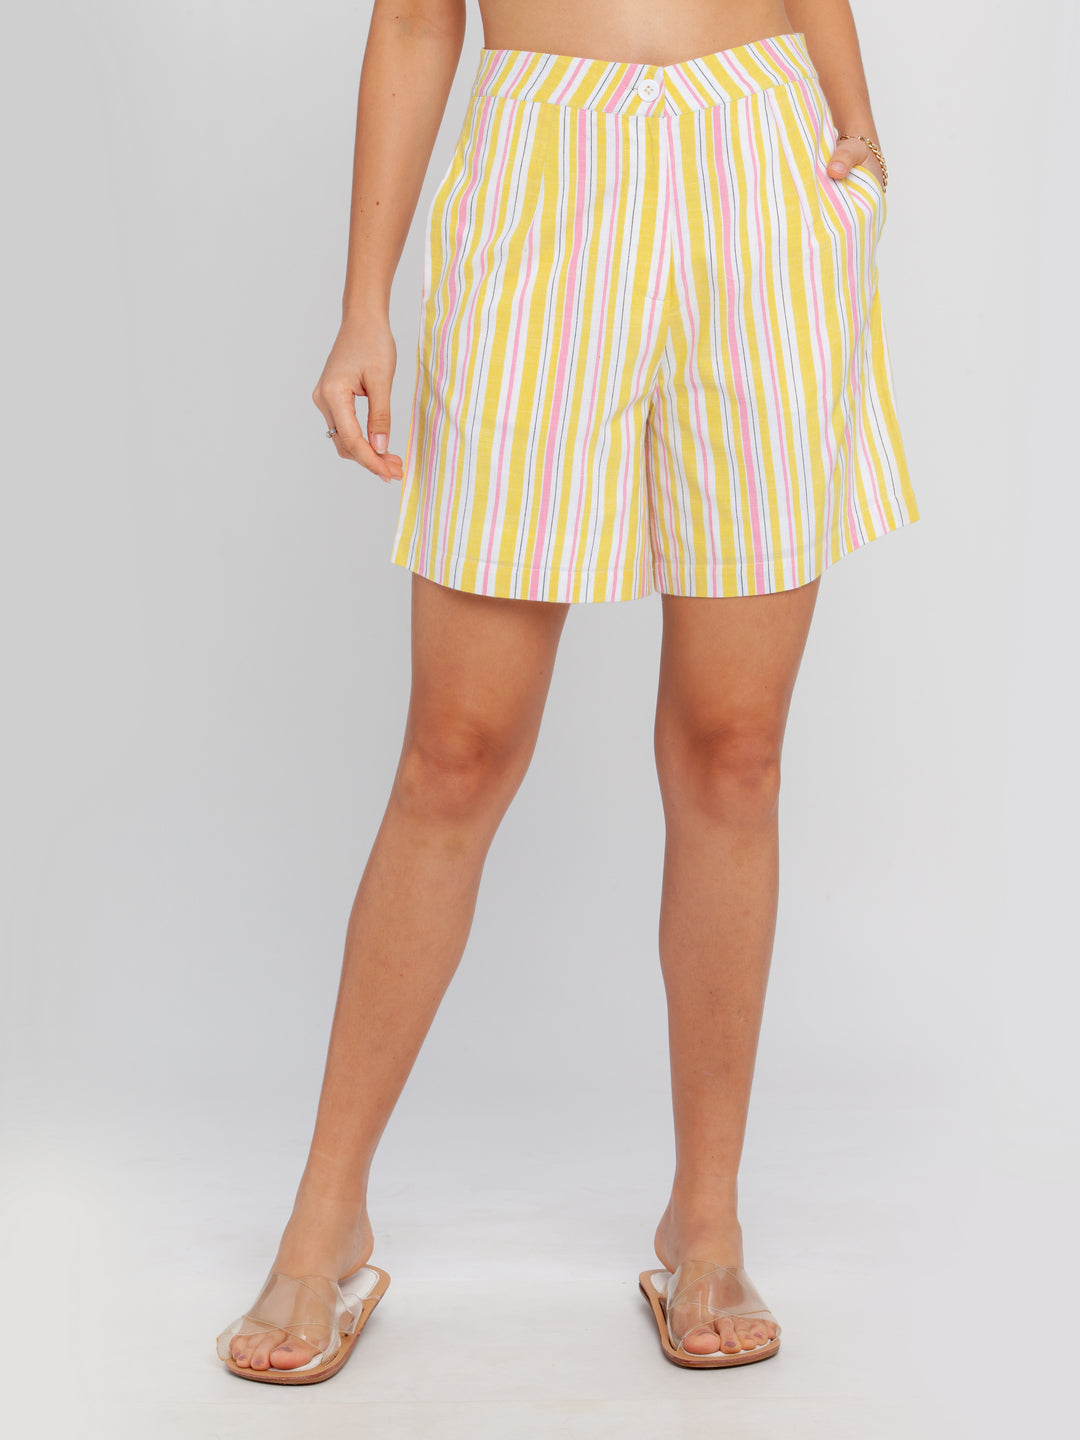 Multicolored Printed Wide Leg Shorts For Women